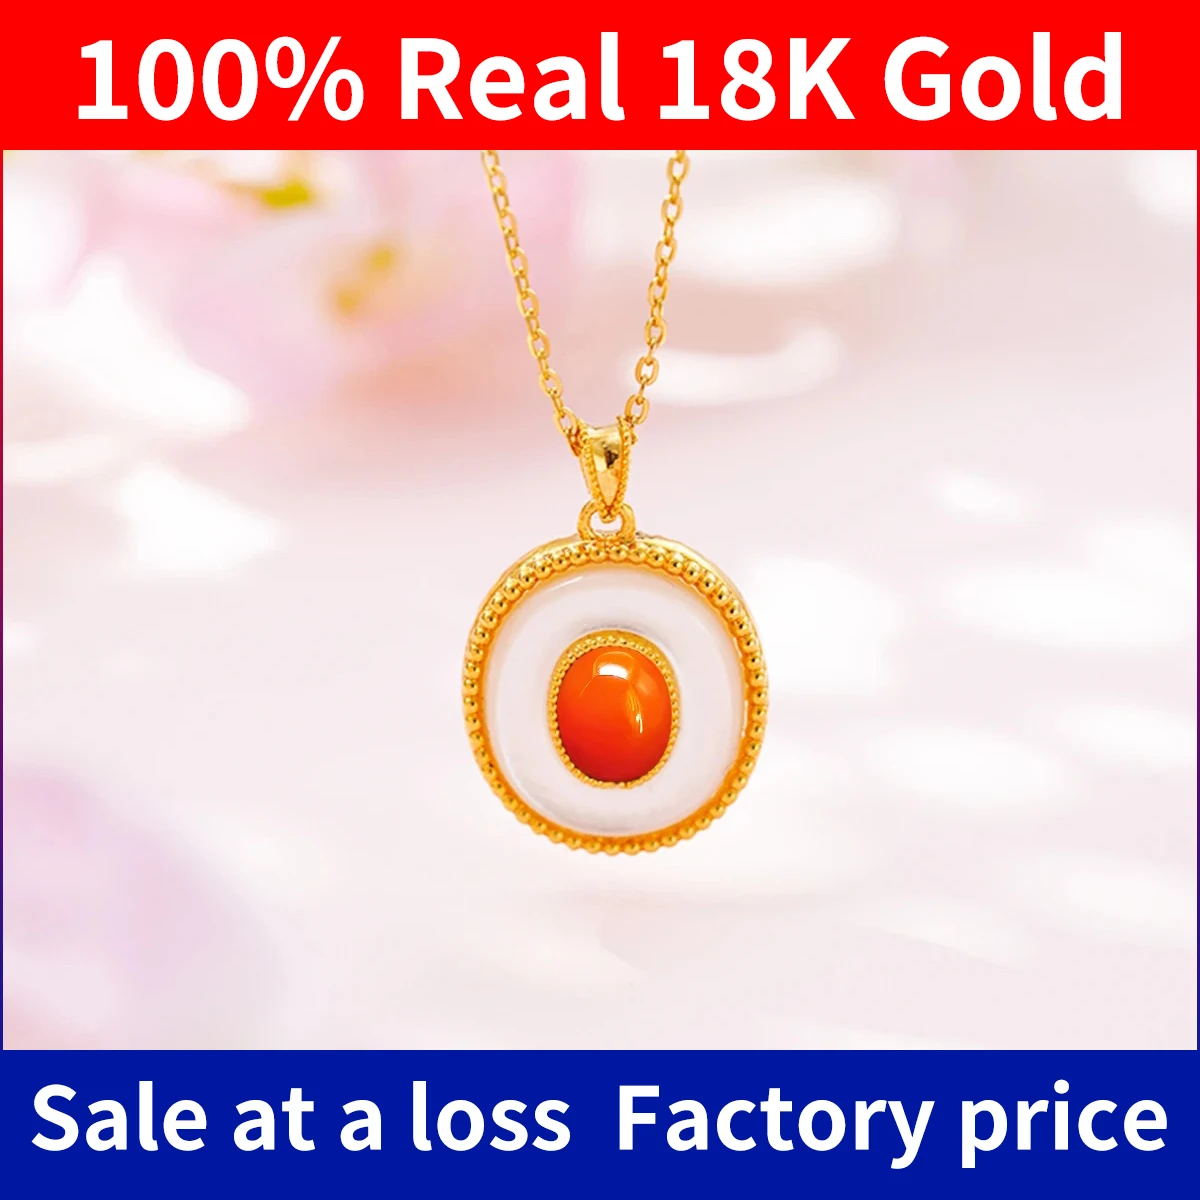 

Szjinao 100% 18k Gold Necklace Women Dubai Red Agate Natural Stone With Certificate AU750 Pure Original Gold Jewelry Gift Female